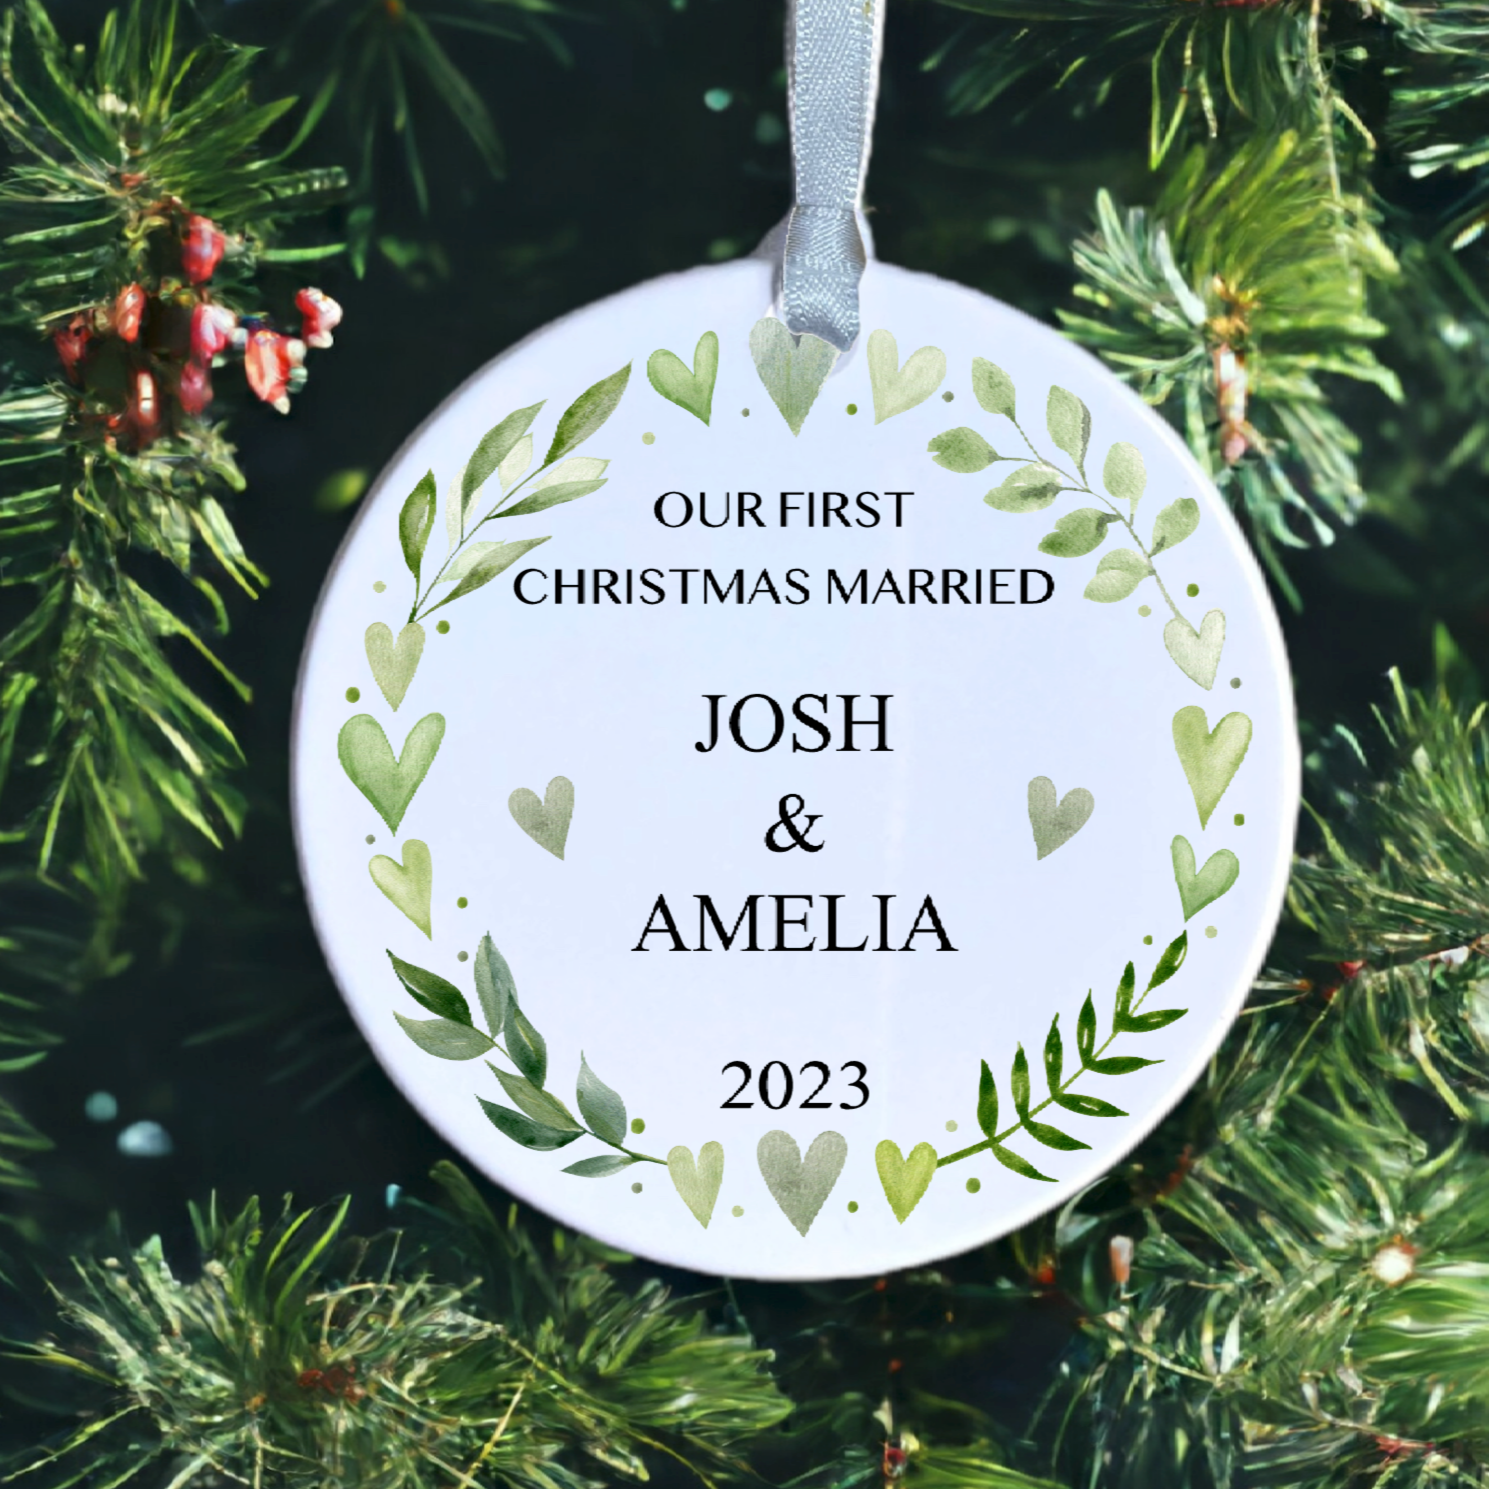 First Christmas married ceramic bauble